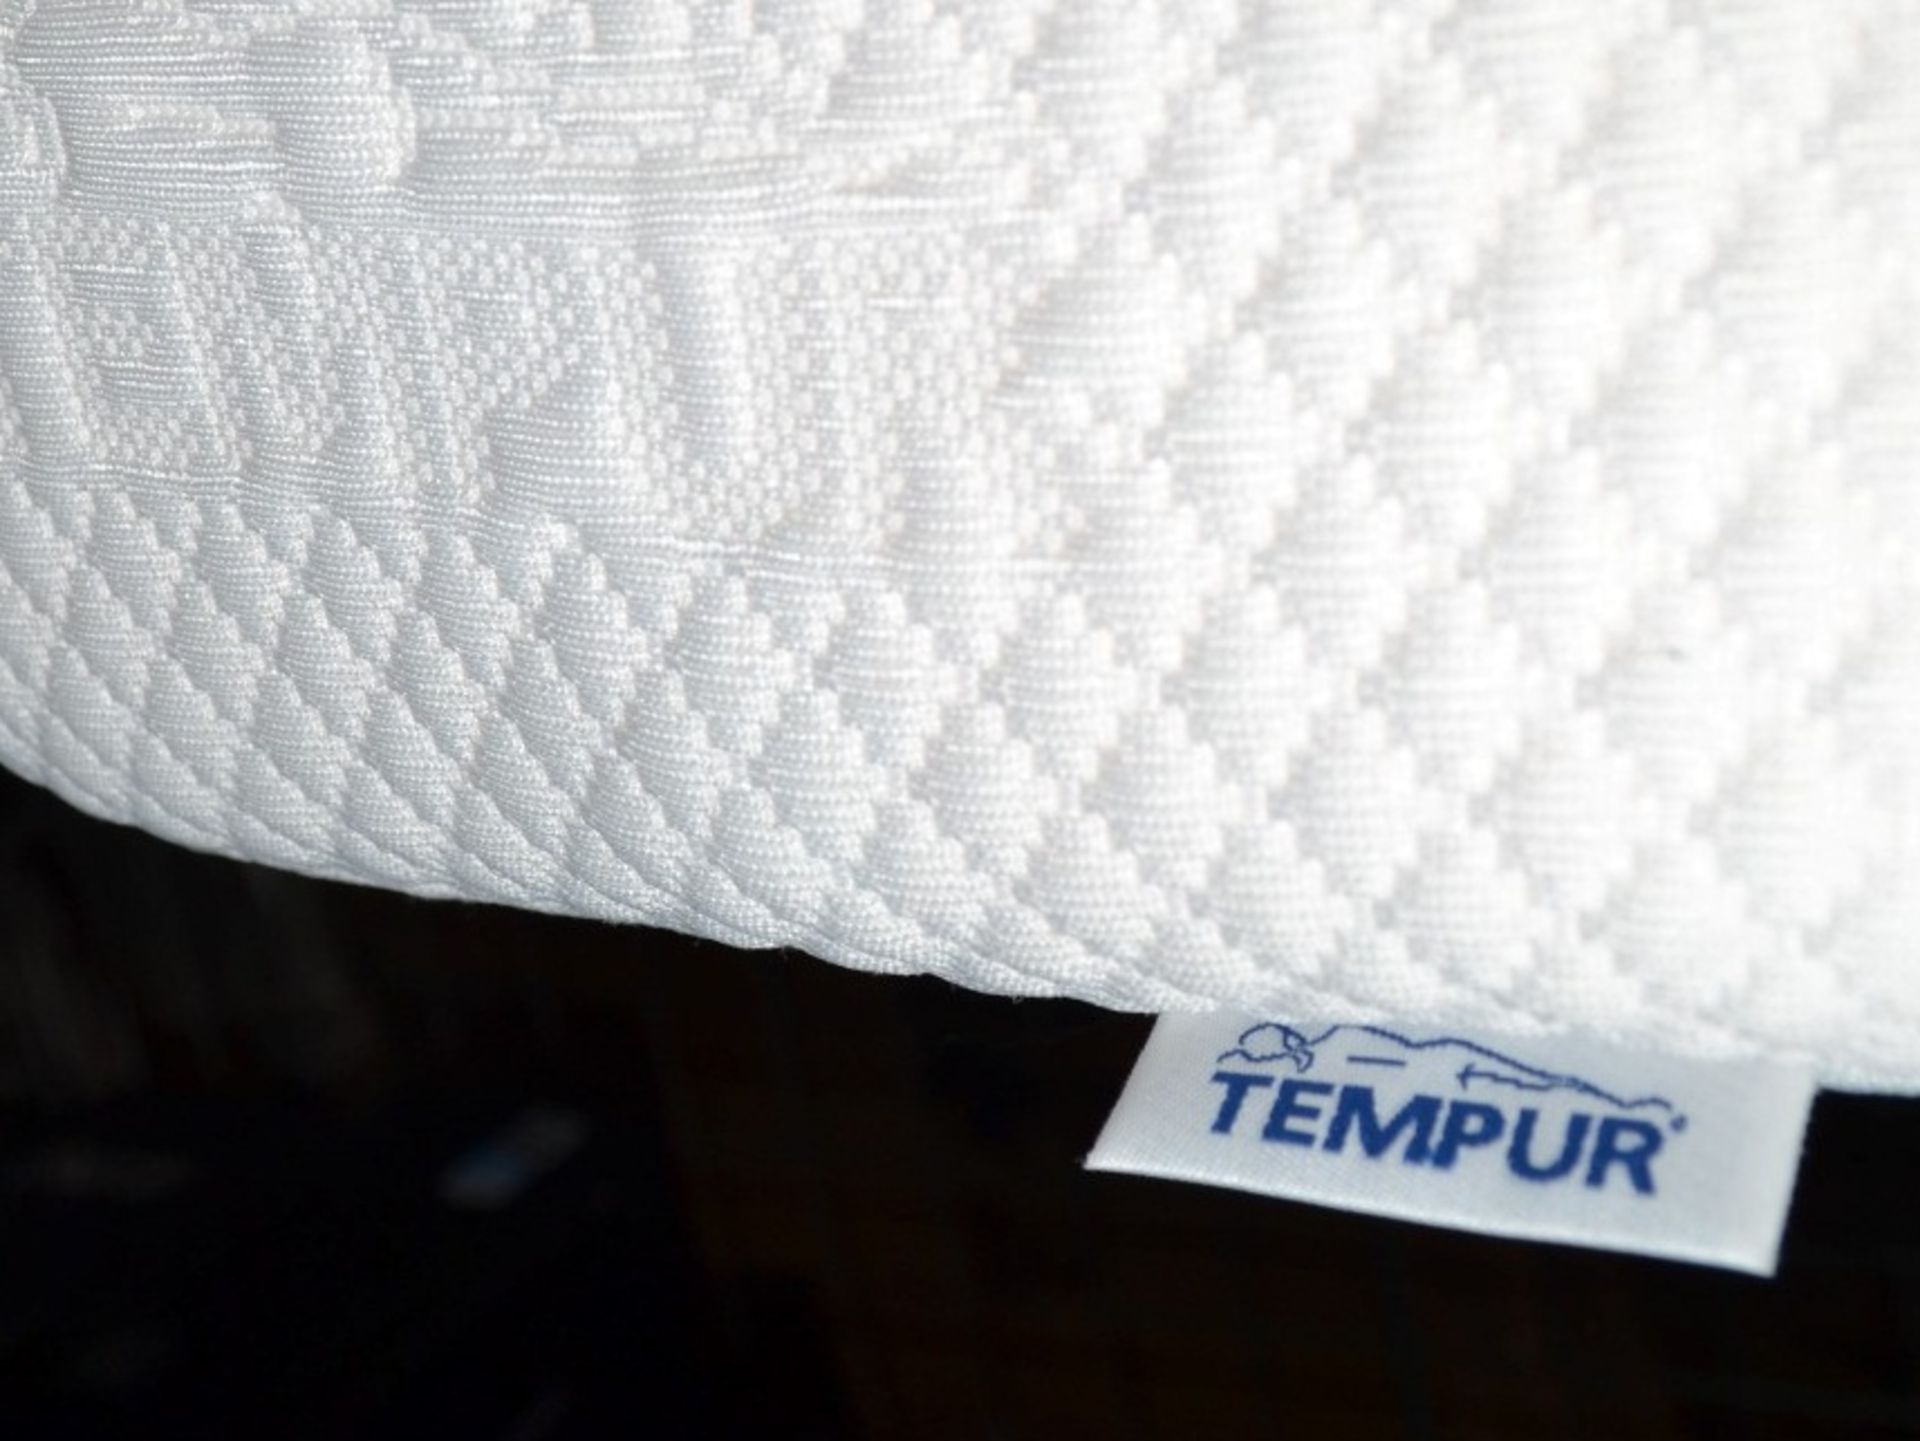 2 x TEMPUR Deluxe Ardennes Mattresses - Dimensions: 75x200cm - Ref: 5355150 P3 *More Details and - Image 3 of 5